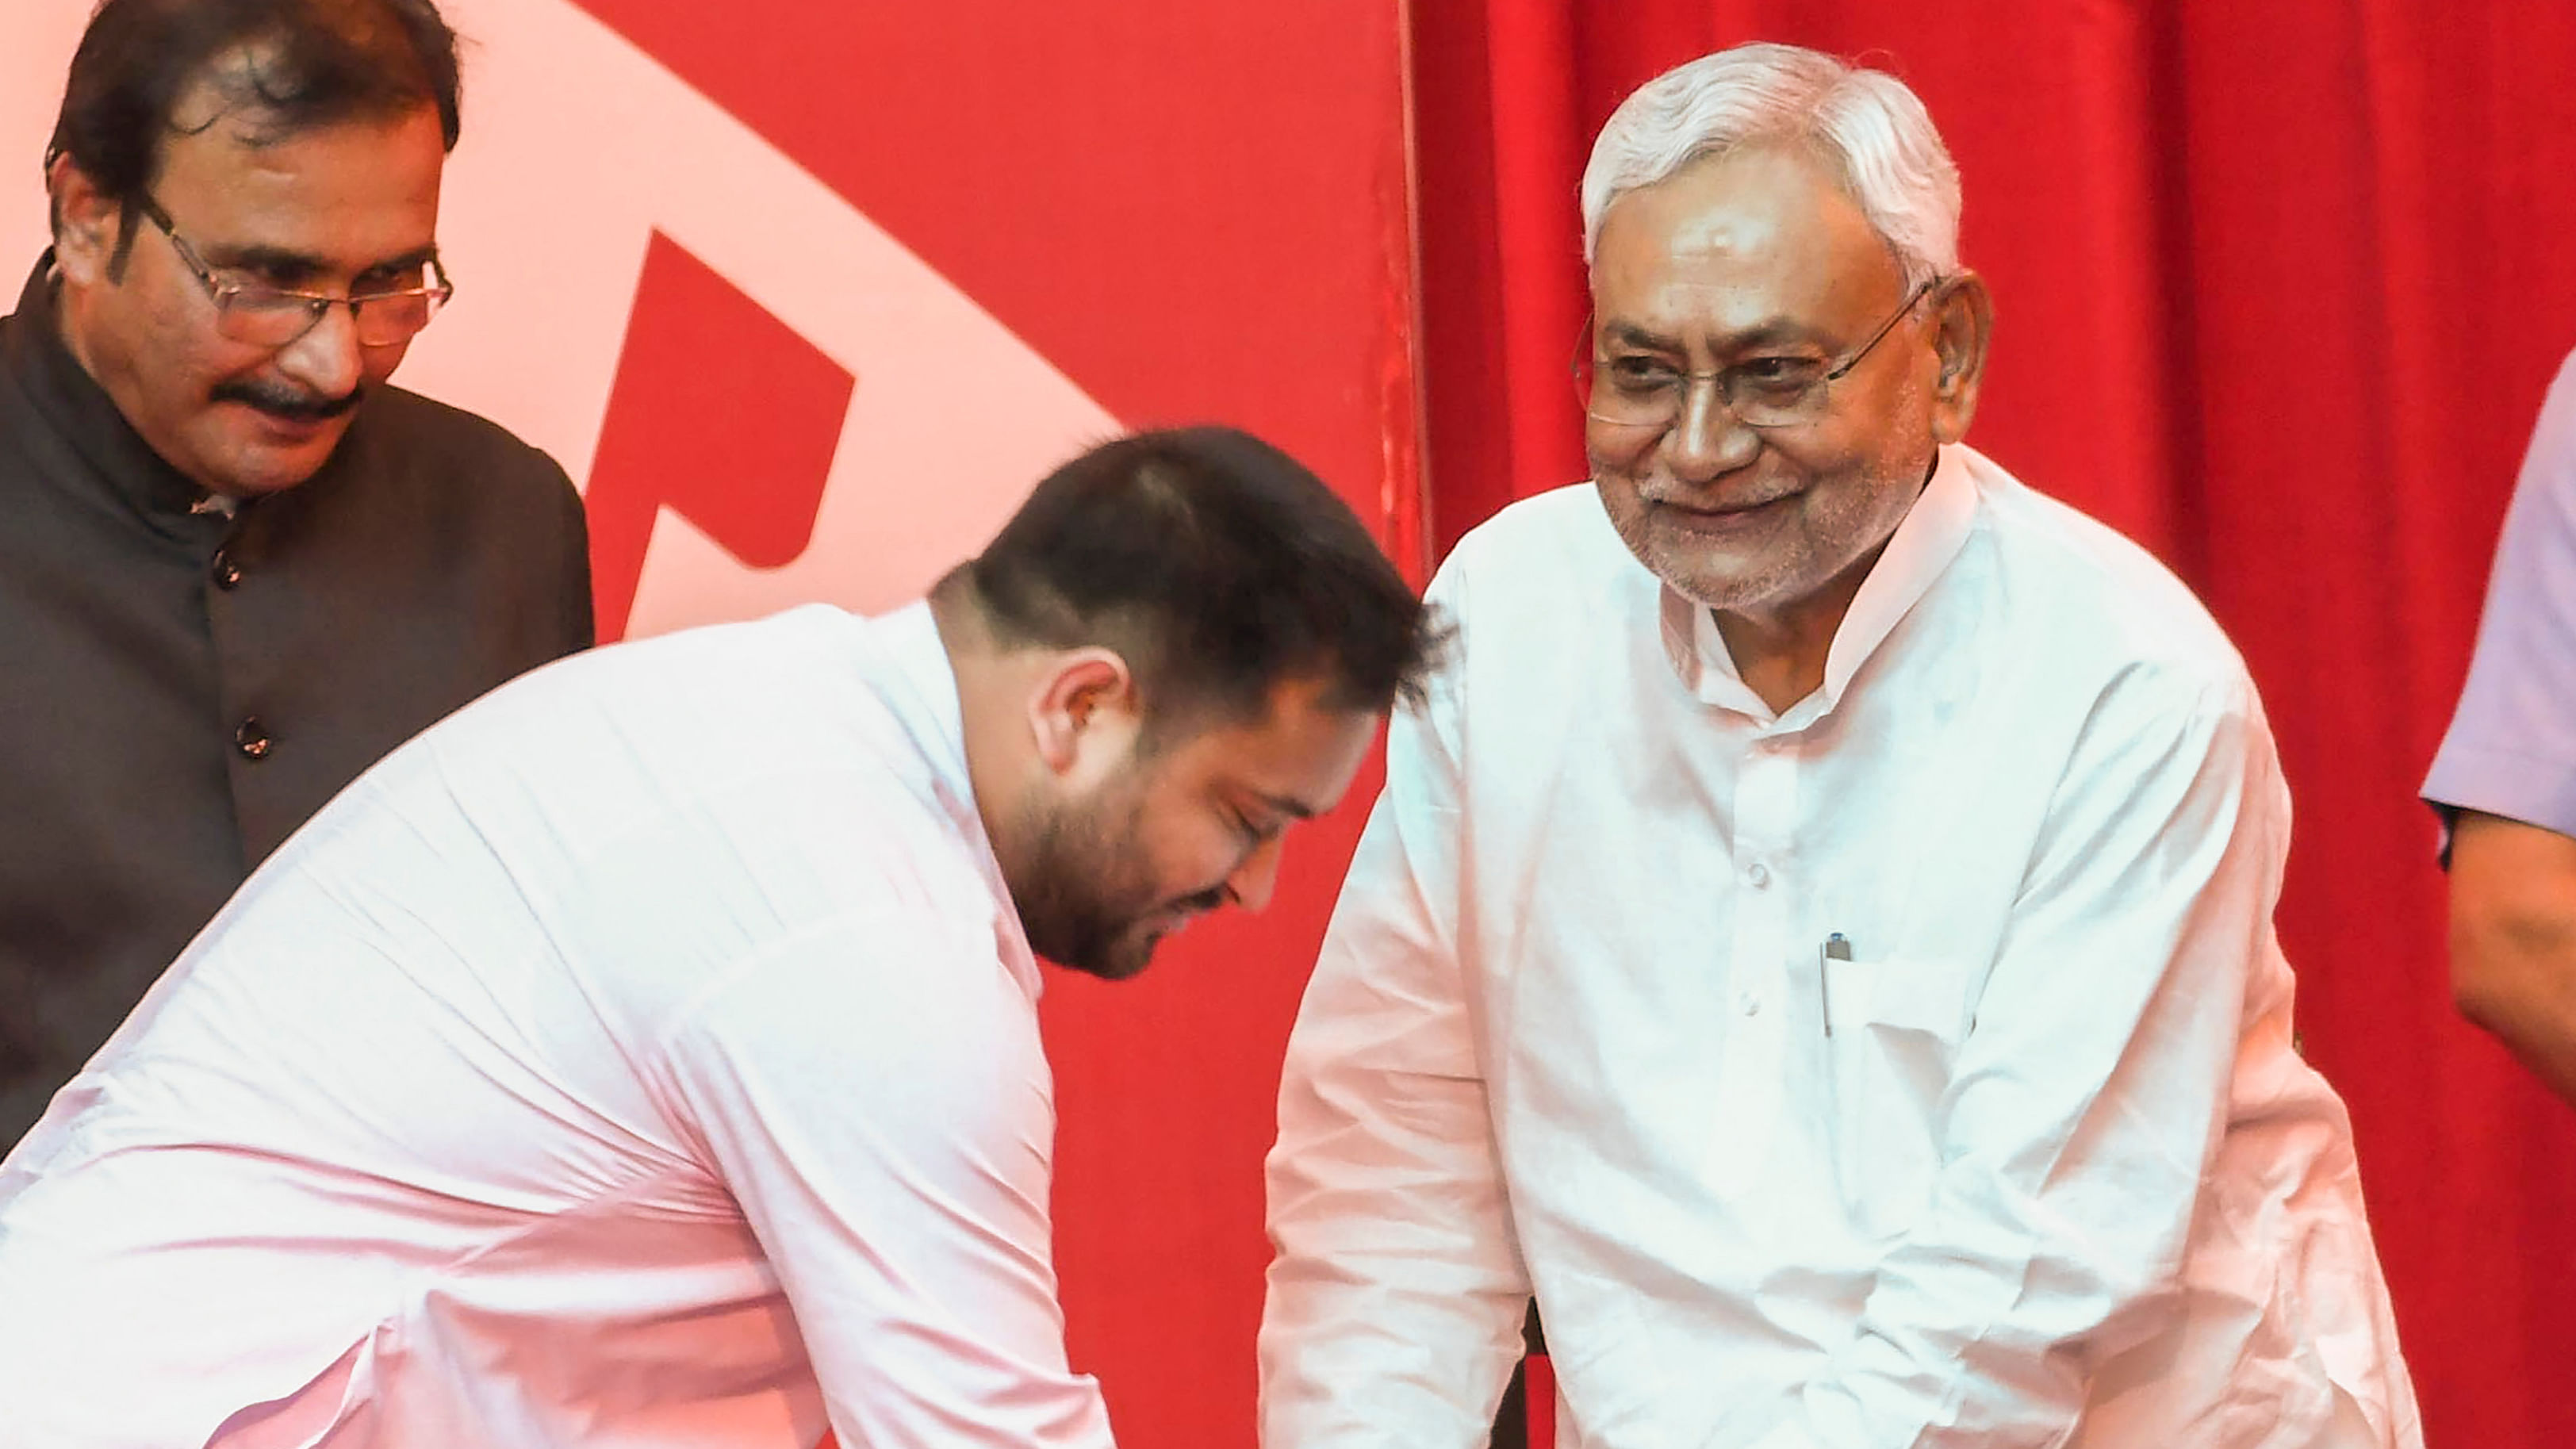 Bihar Chief Minister Nitish Kumar with his deputy Tejashwi Yadav during their swearing-in ceremony. Credit: PTI Photo